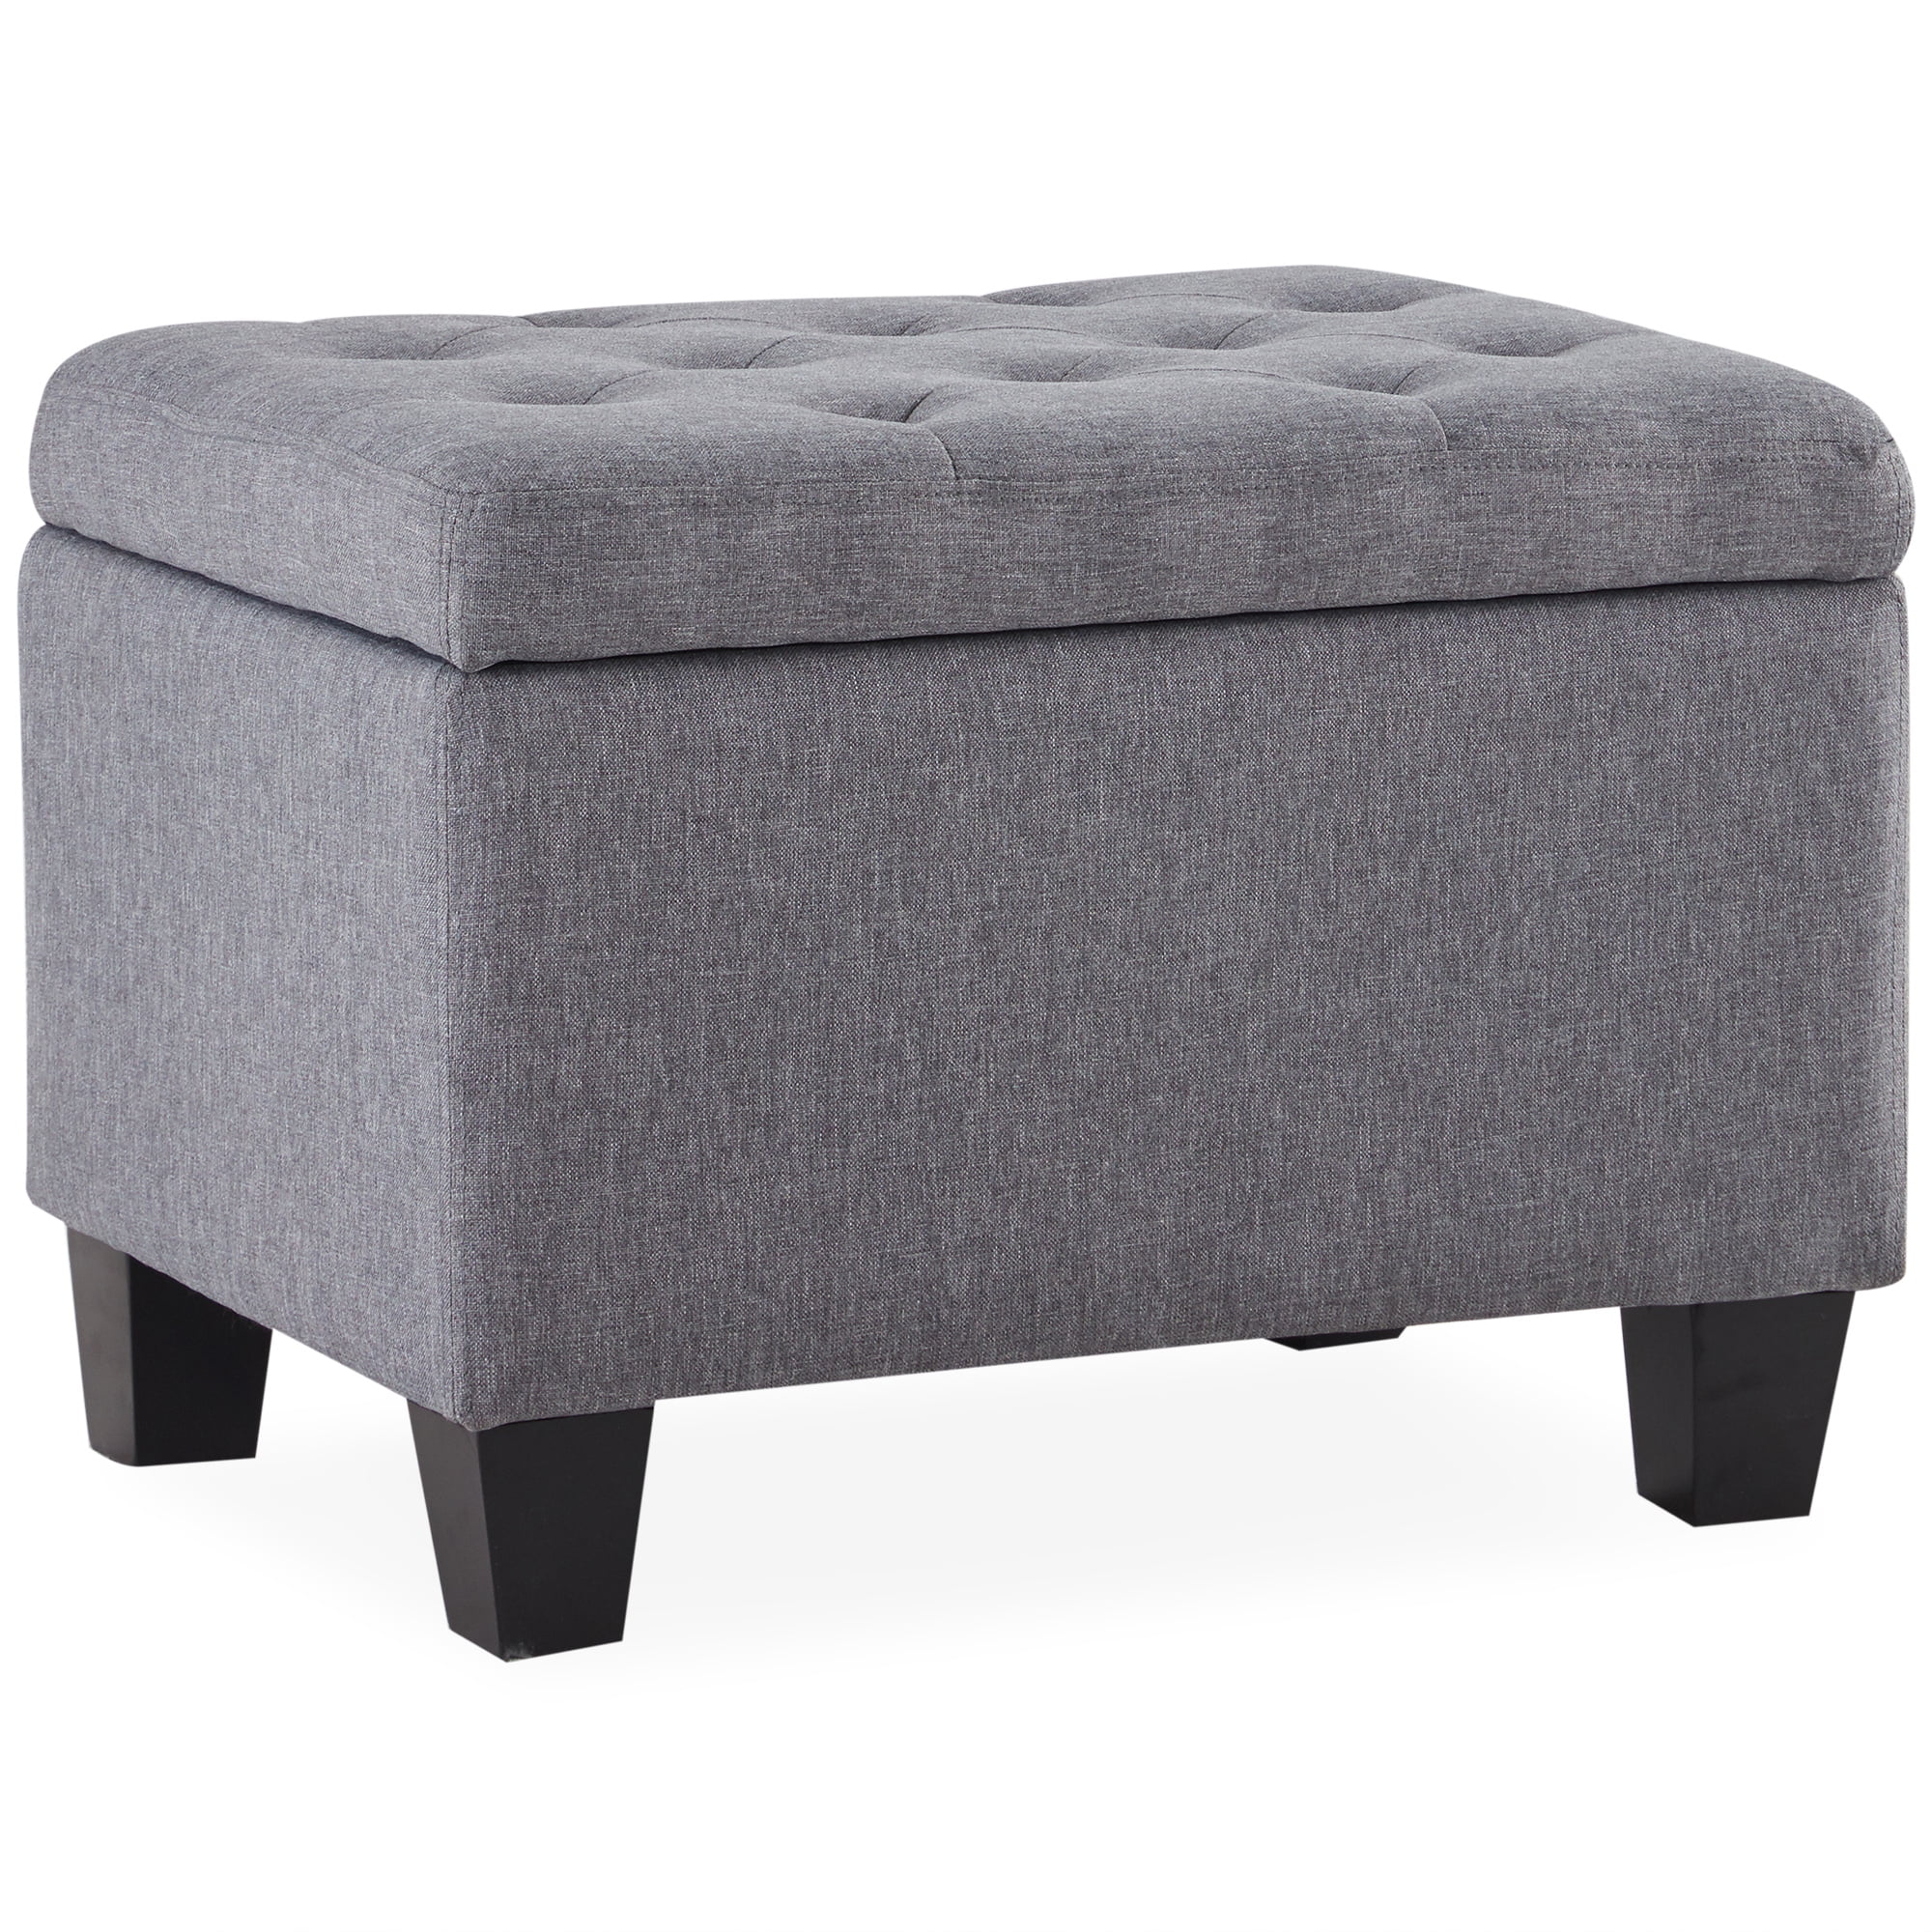 Stylish Padded Wooden Footstool Ottoman in Square Round Rectangle in 3 Styles 